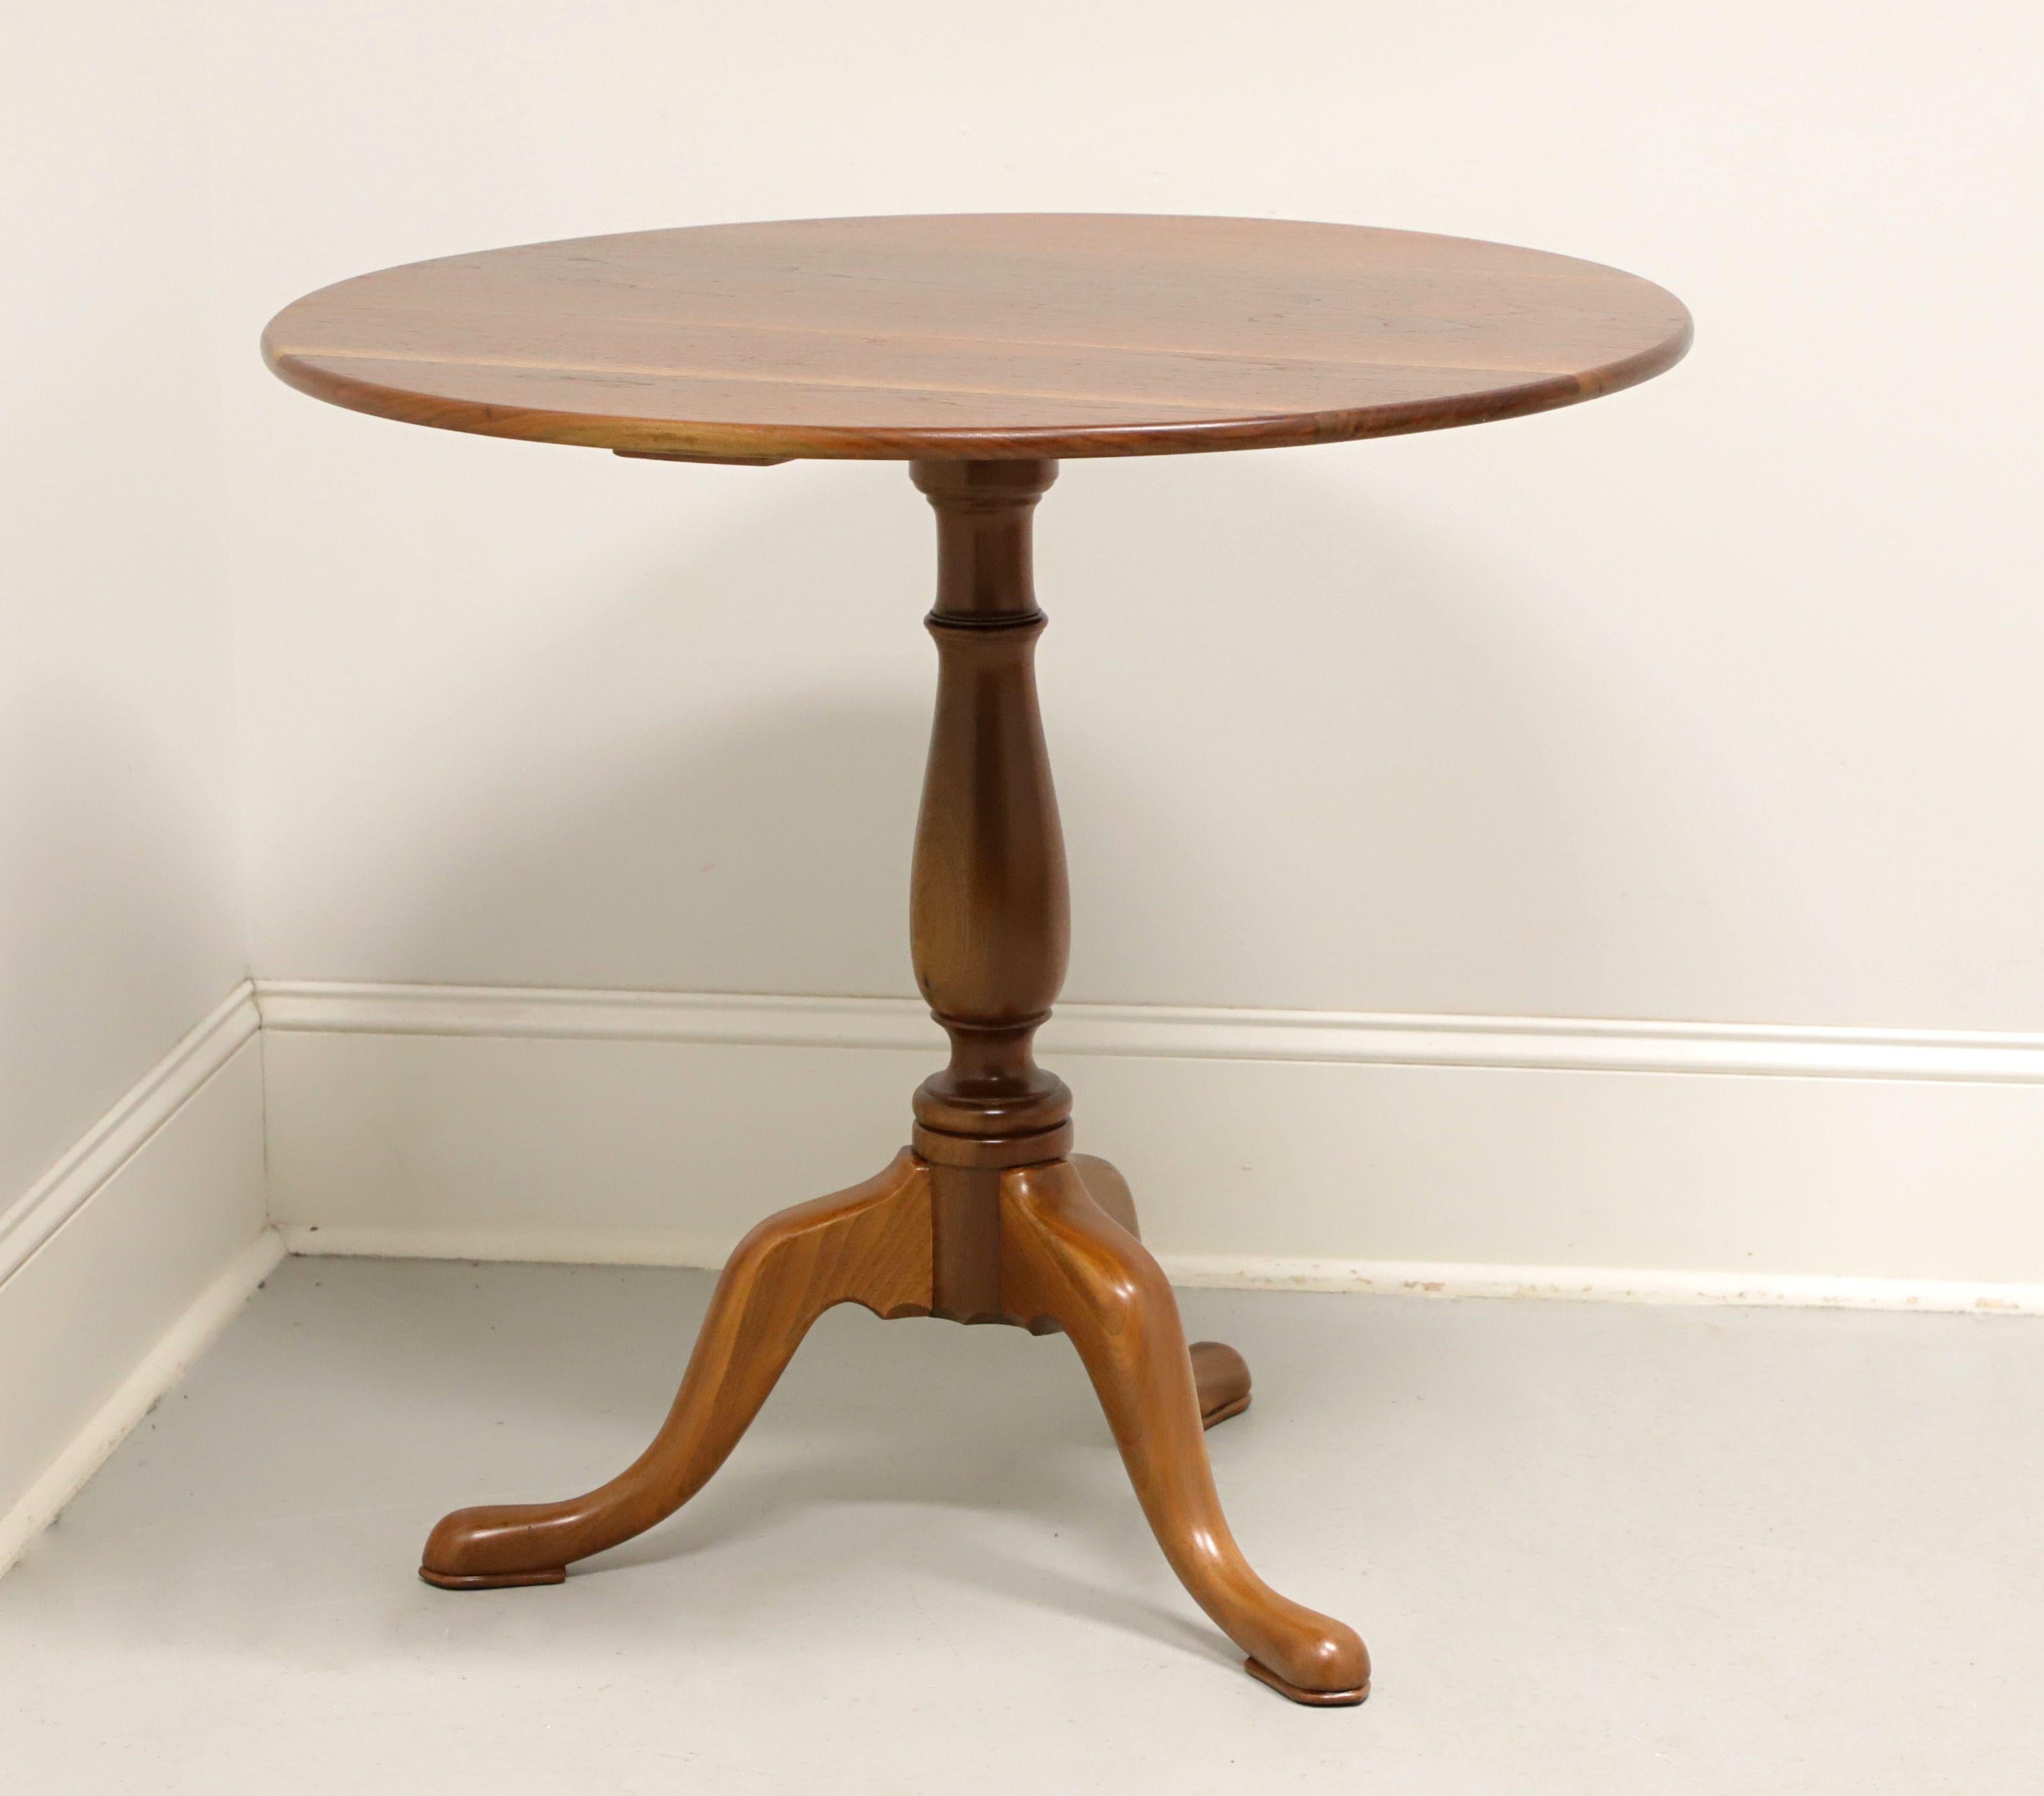 An antique Queen Anne style breakfast or center table, unbranded. Hand crafted of solid walnut with a light finish, smooth edge top, turned pedestal, three curved legs, and pad feet. Made in the USA, in the early 20th Century.

Measures: 32.25w